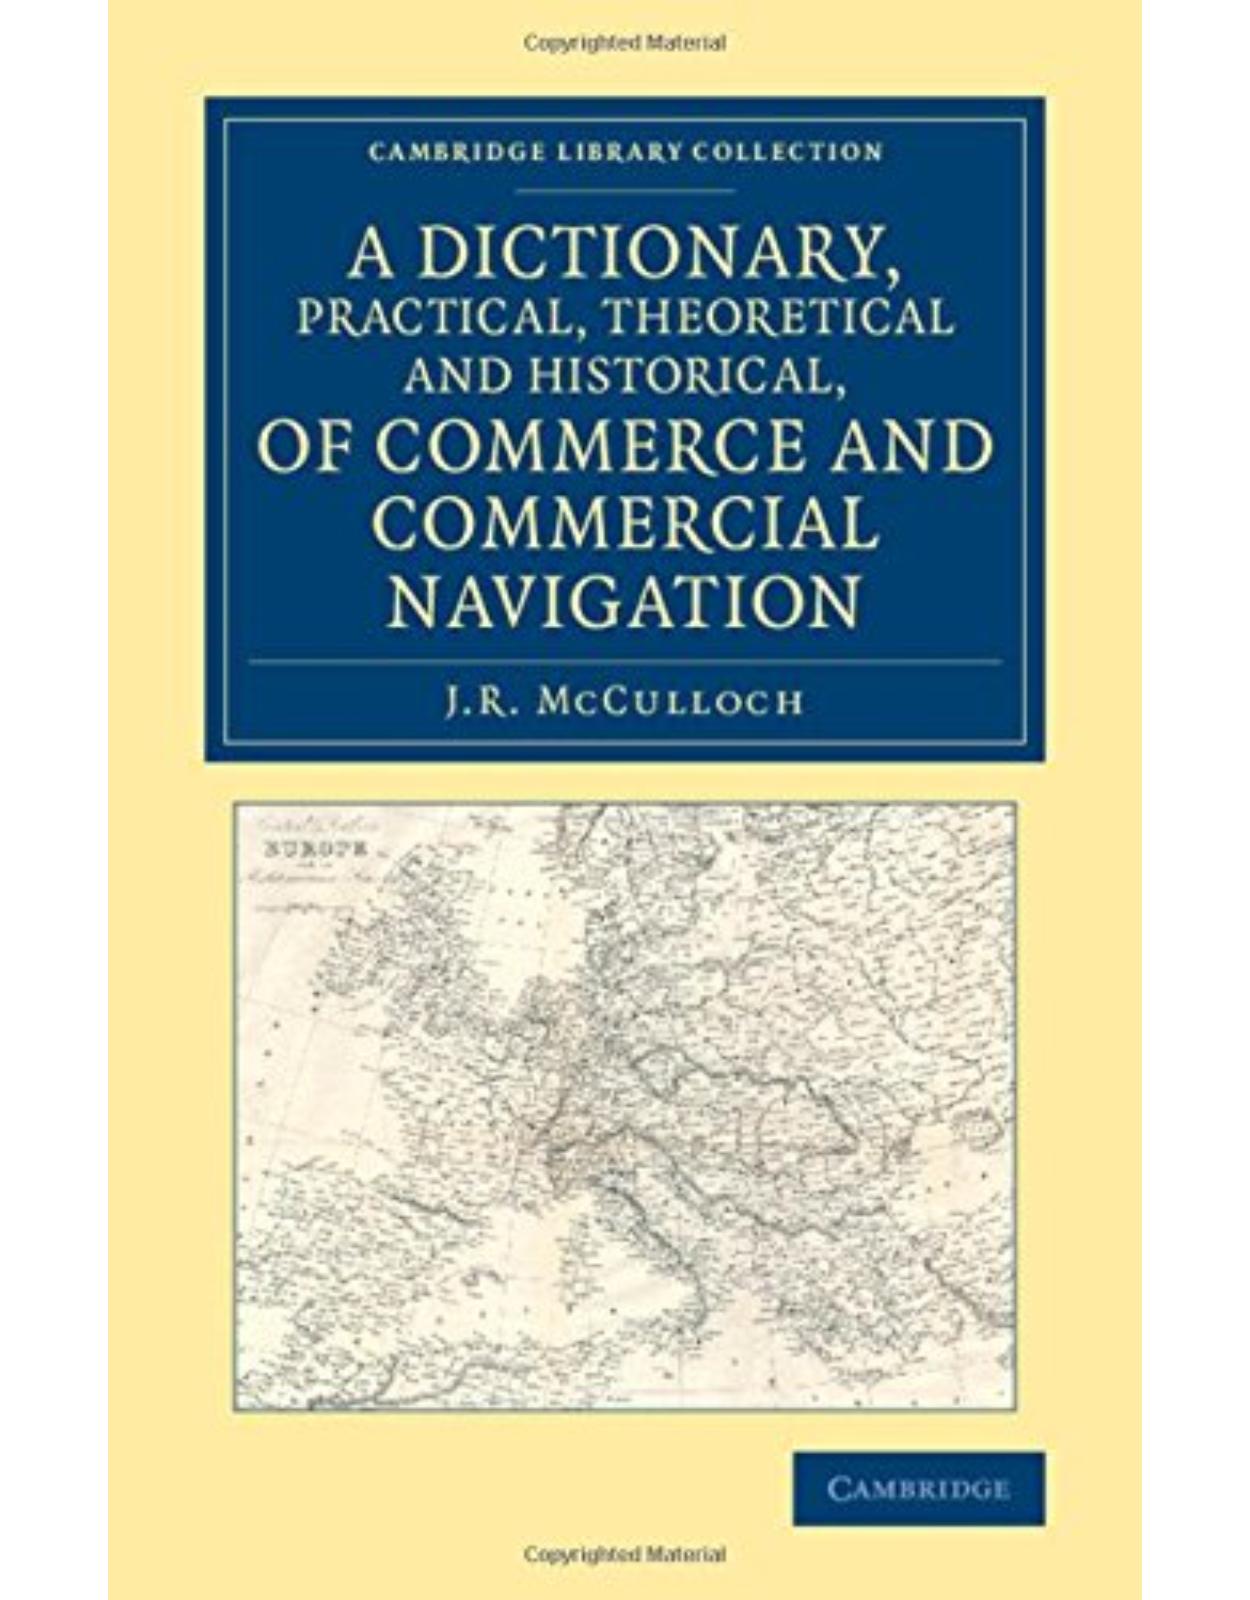 A Dictionary, Practical, Theoretical and Historical, of Commerce and Commercial Navigation (Cambridge Library Collection - British and Irish History, 19th Century)